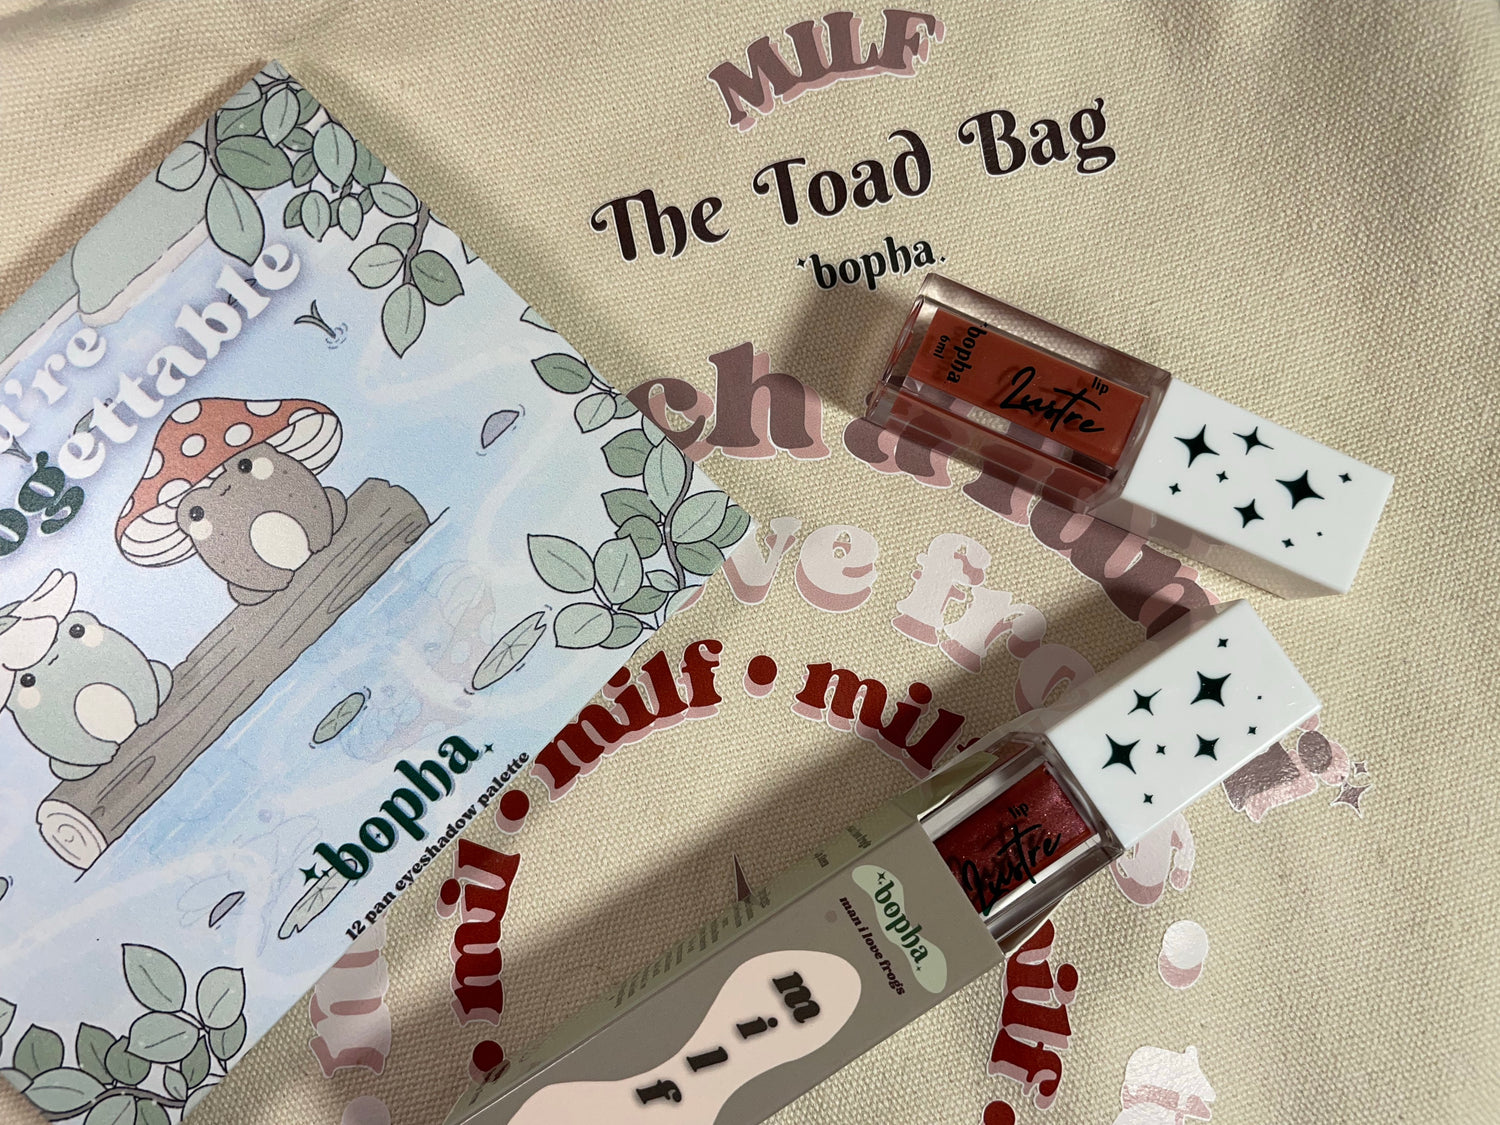 Toad Bags